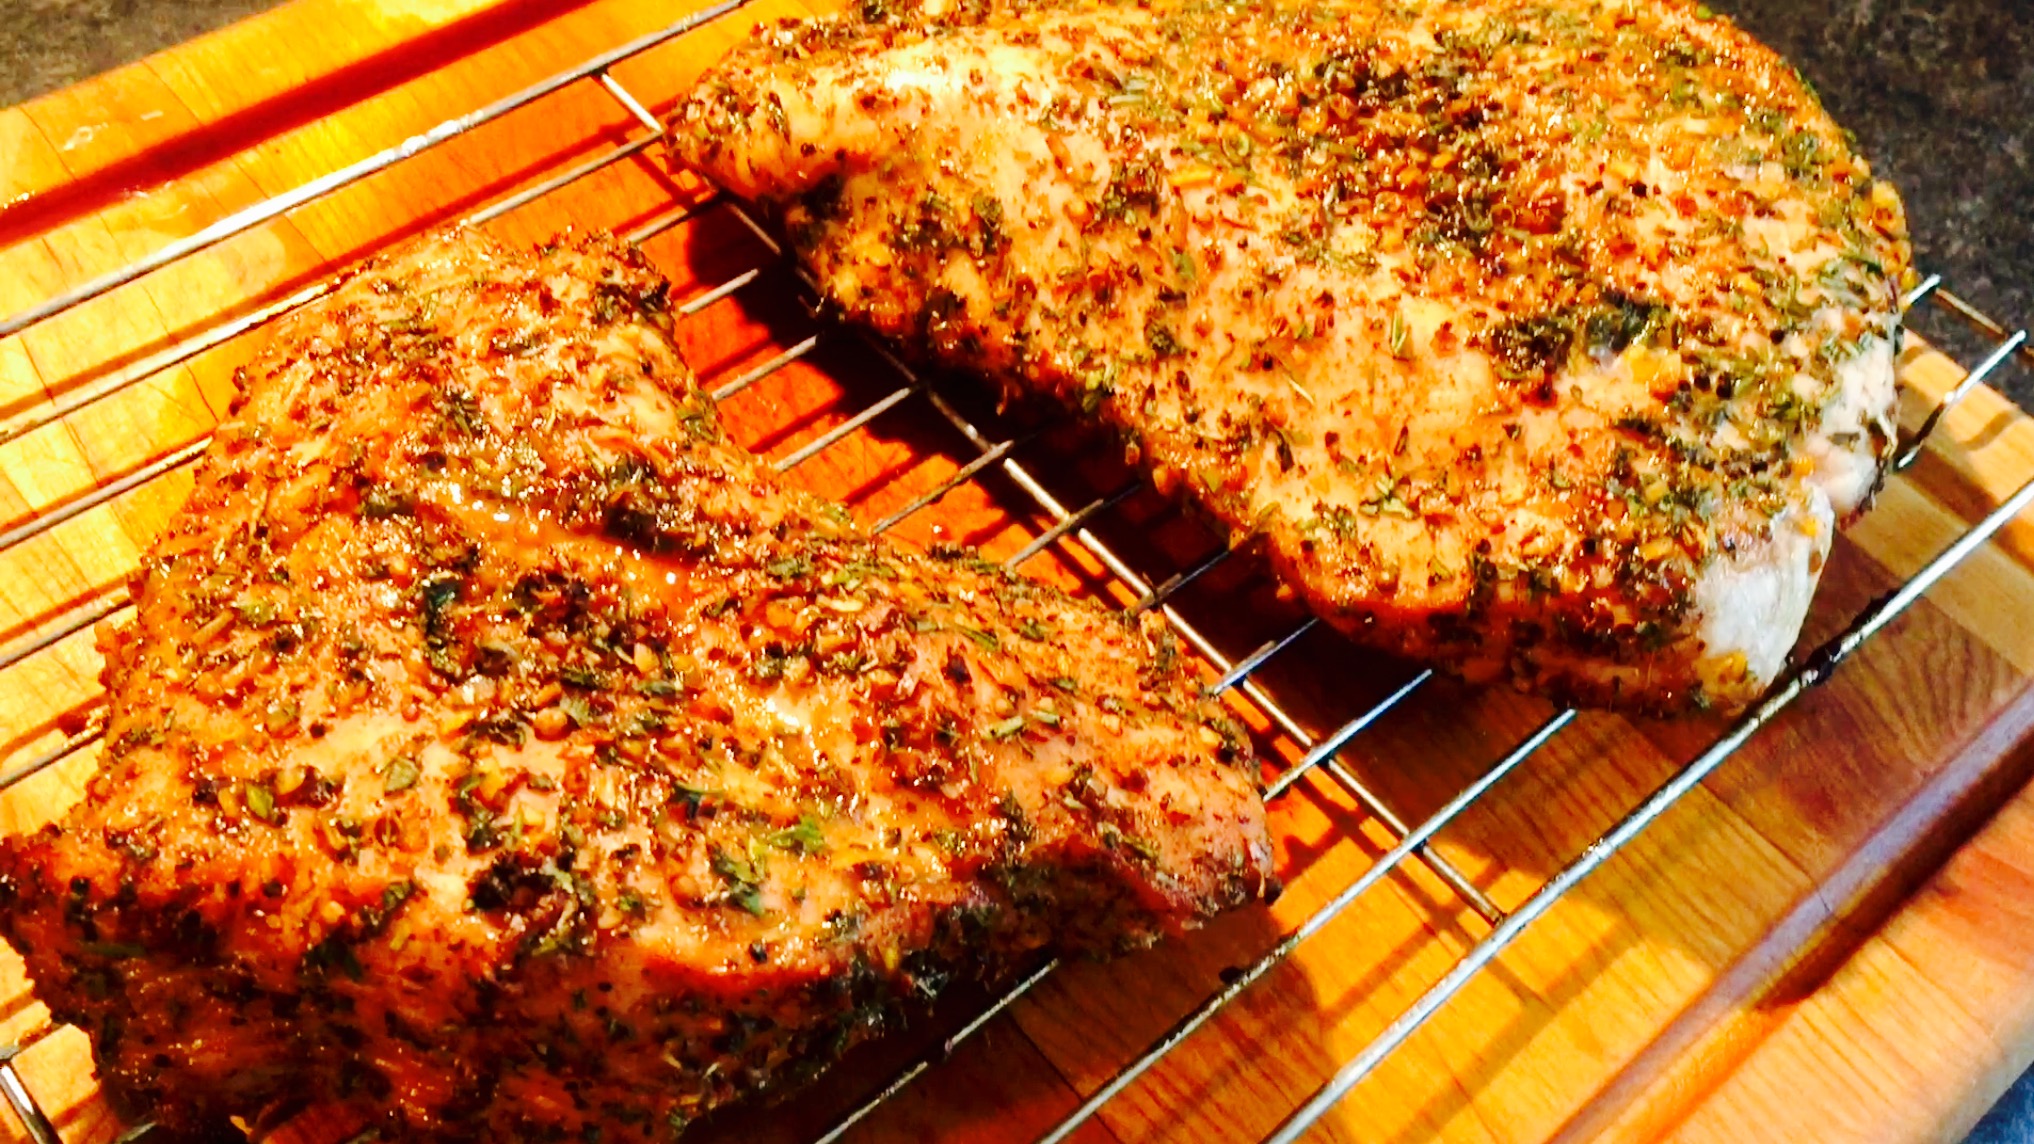 Succulent roasted turkey breast in a delicious rub complete with brown sugar and fresh herbs